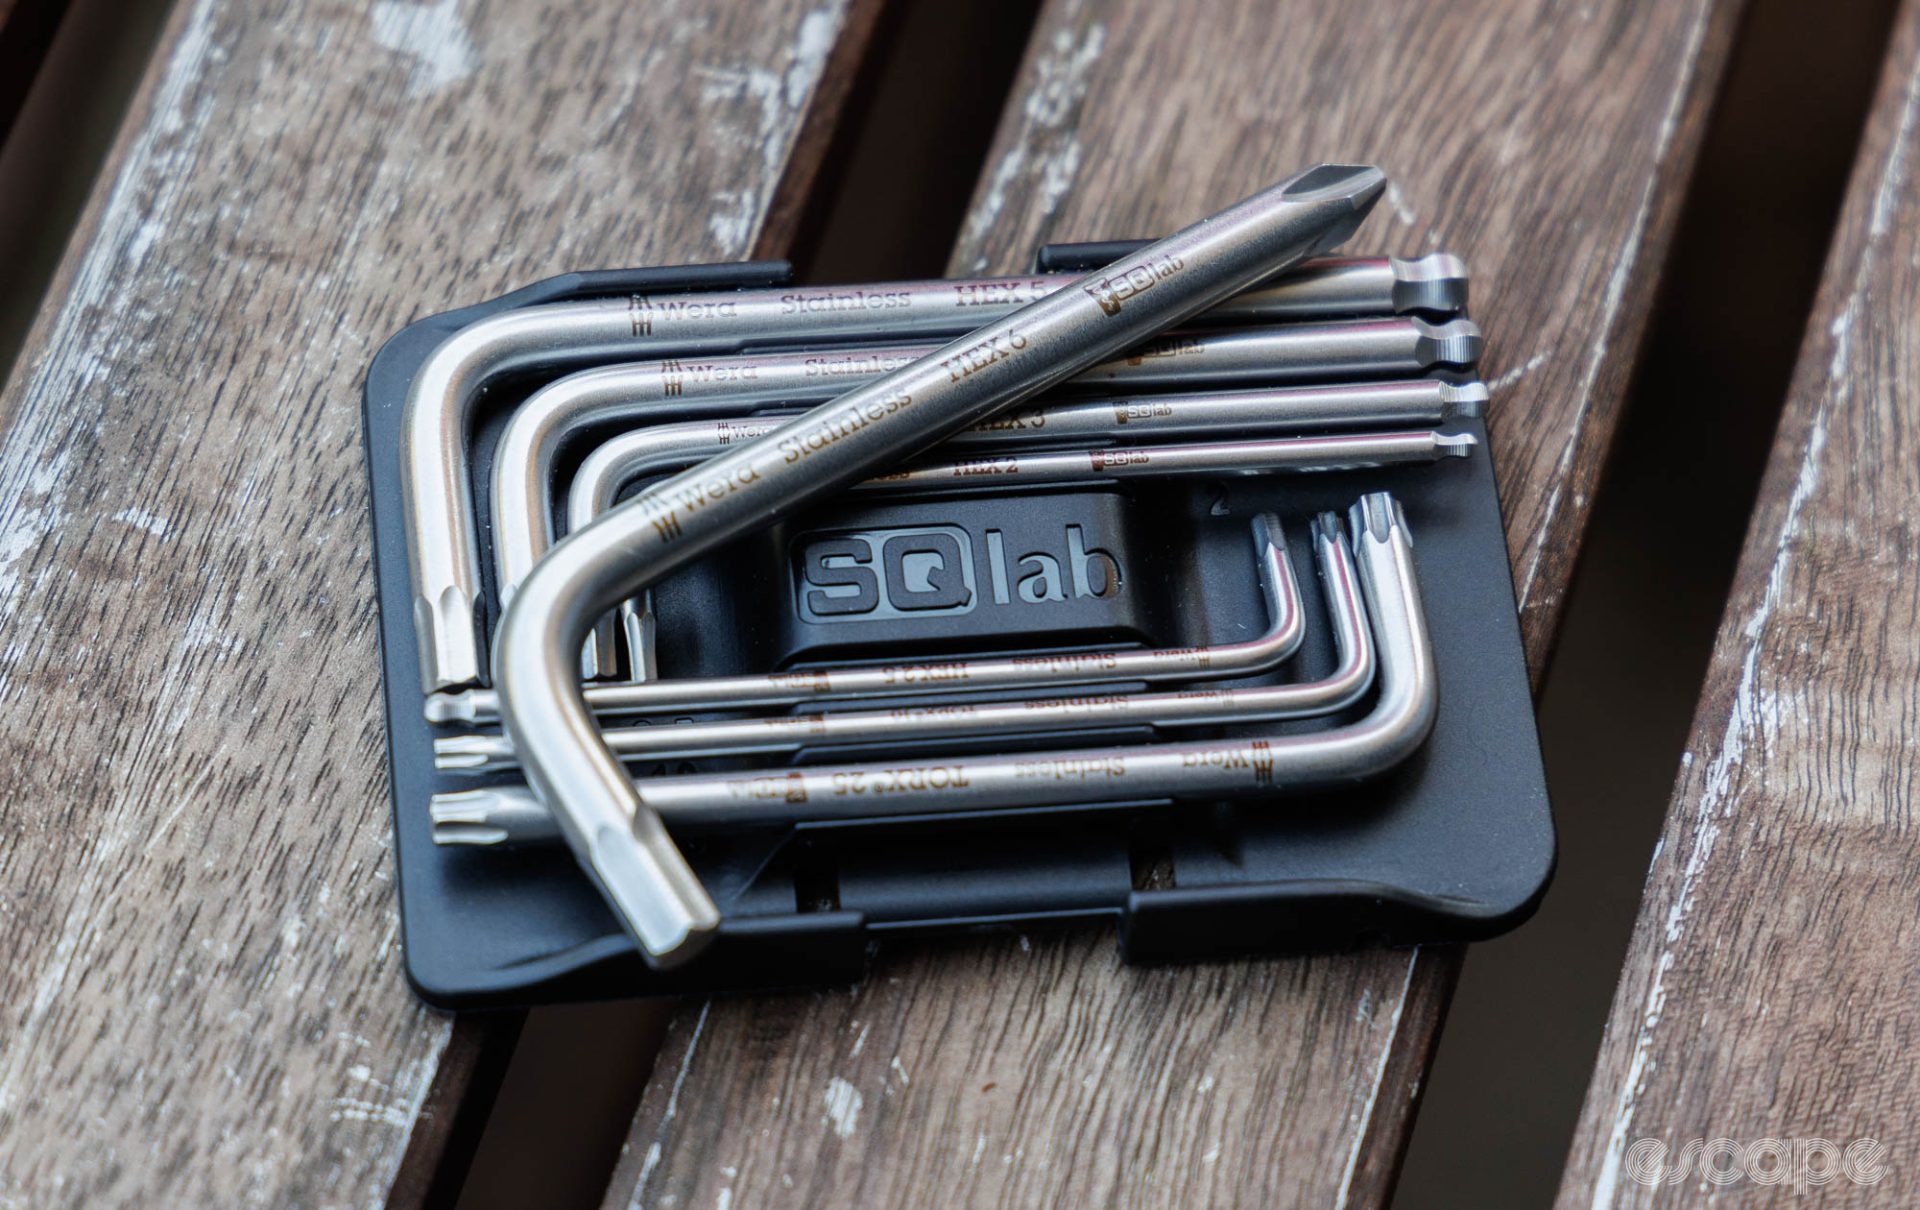 A close up showing the SQLabs holding case, and the biggest tool of the set. 